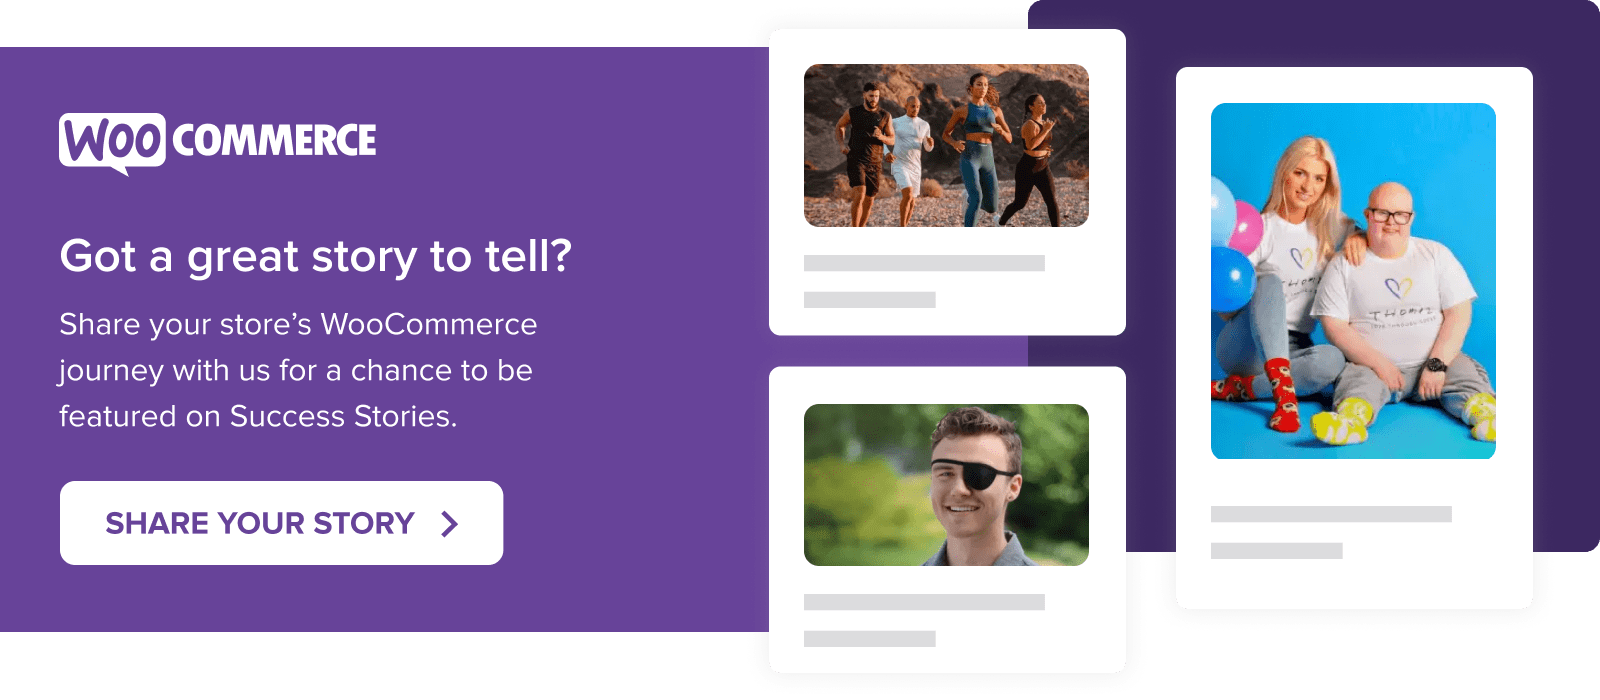 Share your WooCommerce journey with us for a chance to be featured on Success Stories